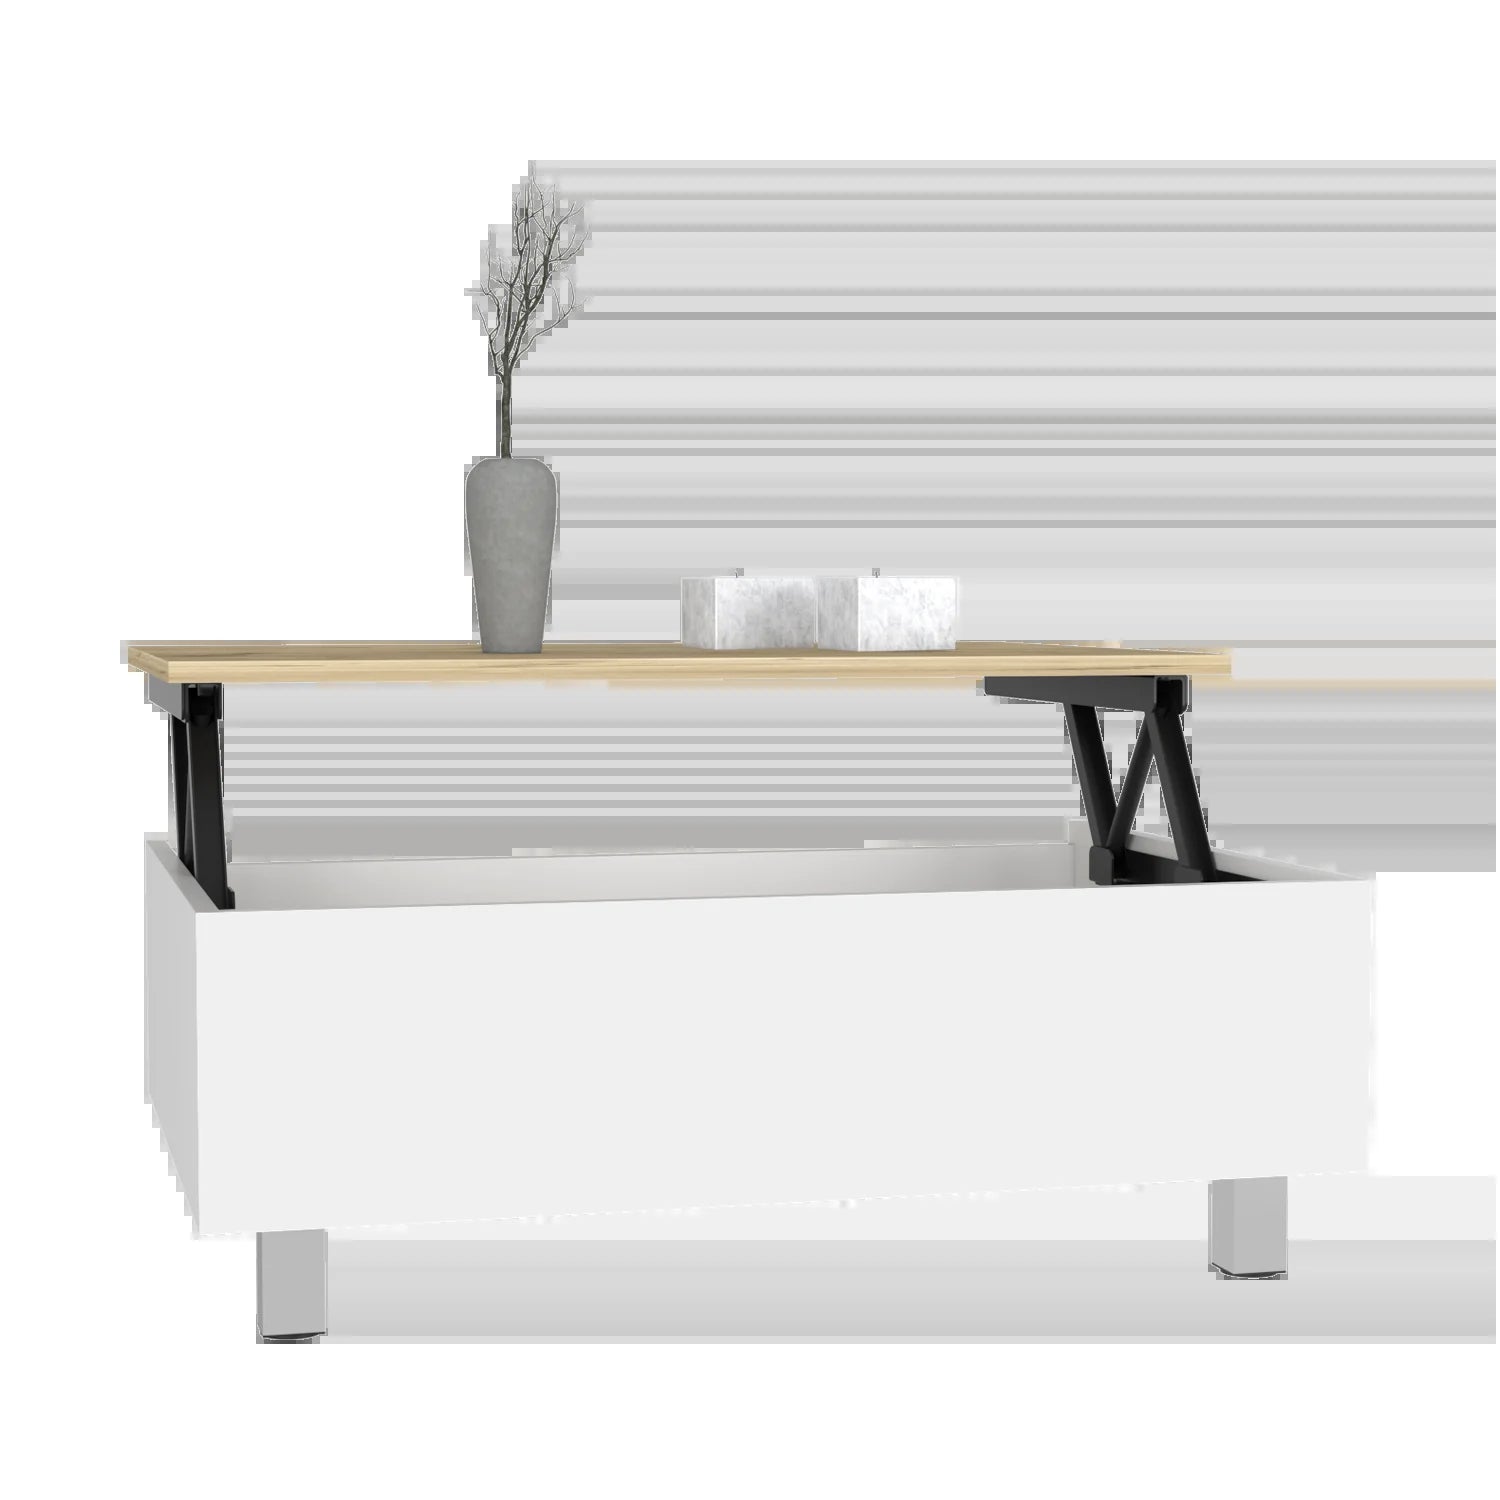 "Annapolis Lift Top Coffee Table with Hidden Storage - Elegant White and Light Oak Finish"